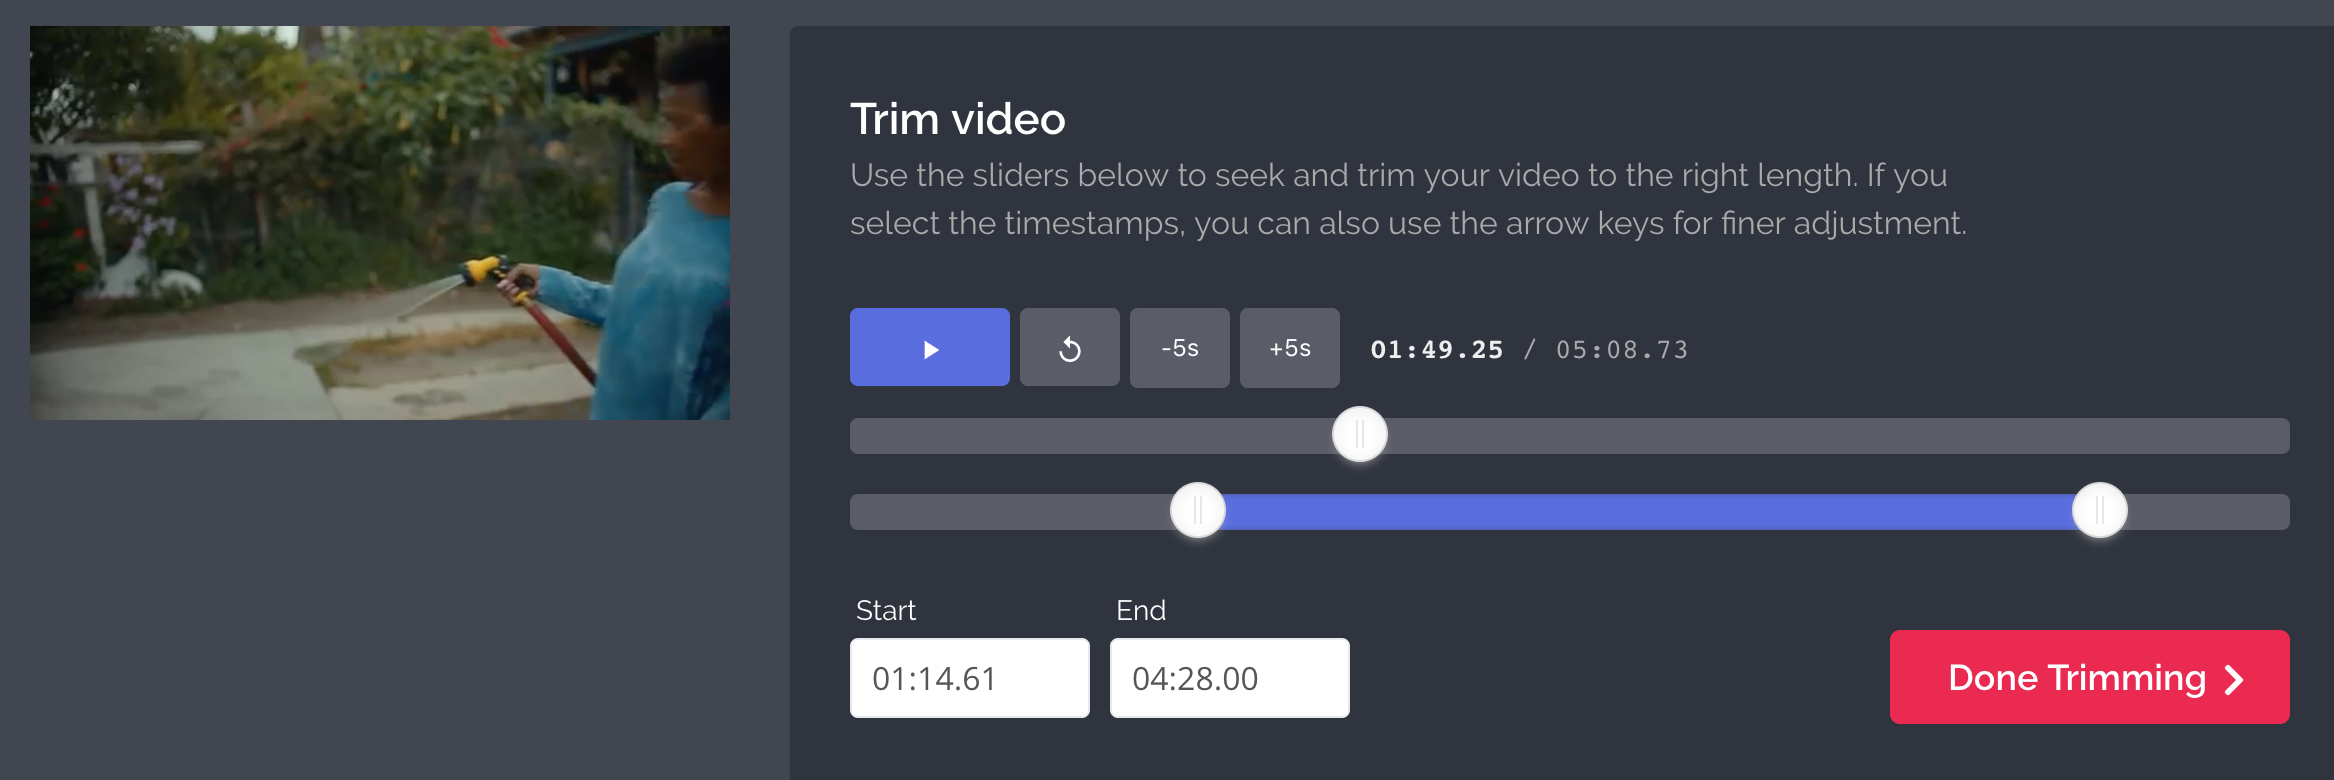 youtube video download trim